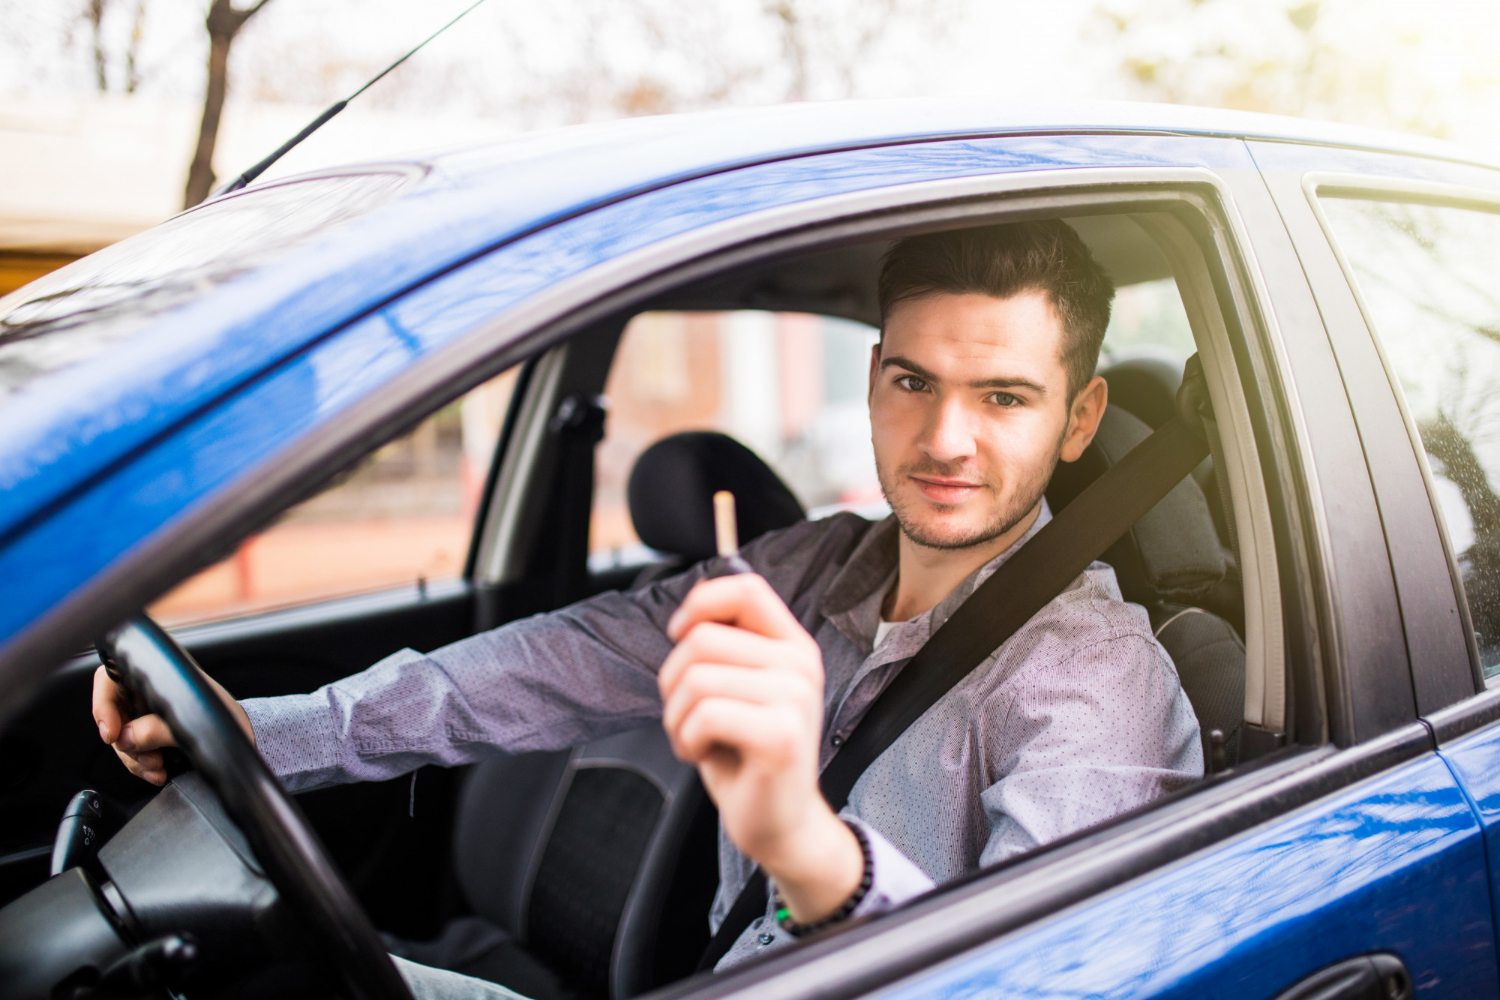 Learn everything about auto loans and get your new car. Source: Freepik.